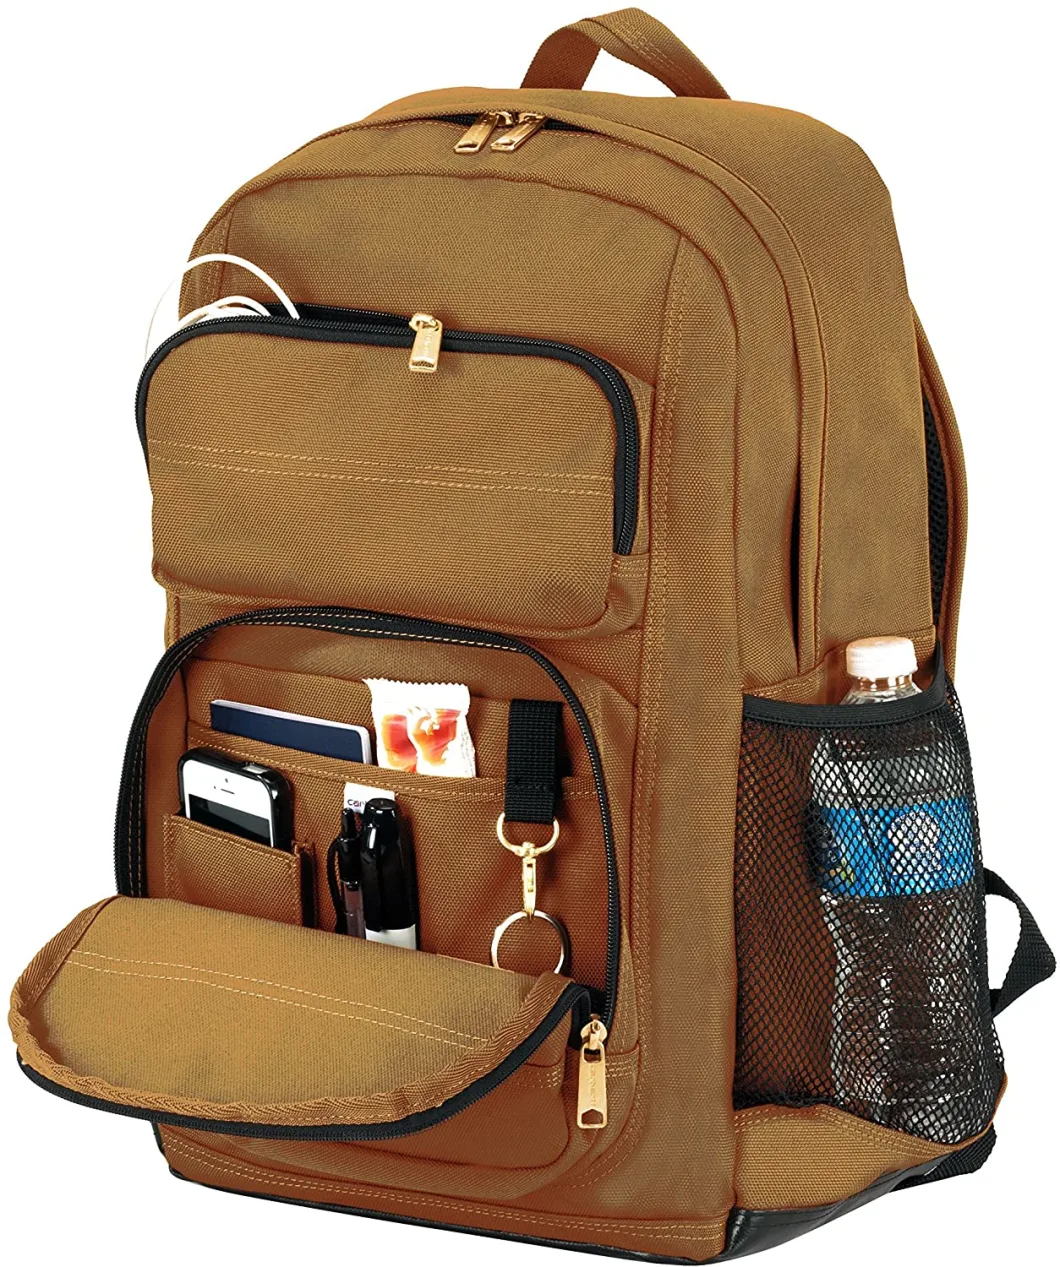 2021 New Arrival Standard Work Backpack with Padded Laptop Sleeve and Tablet Storage